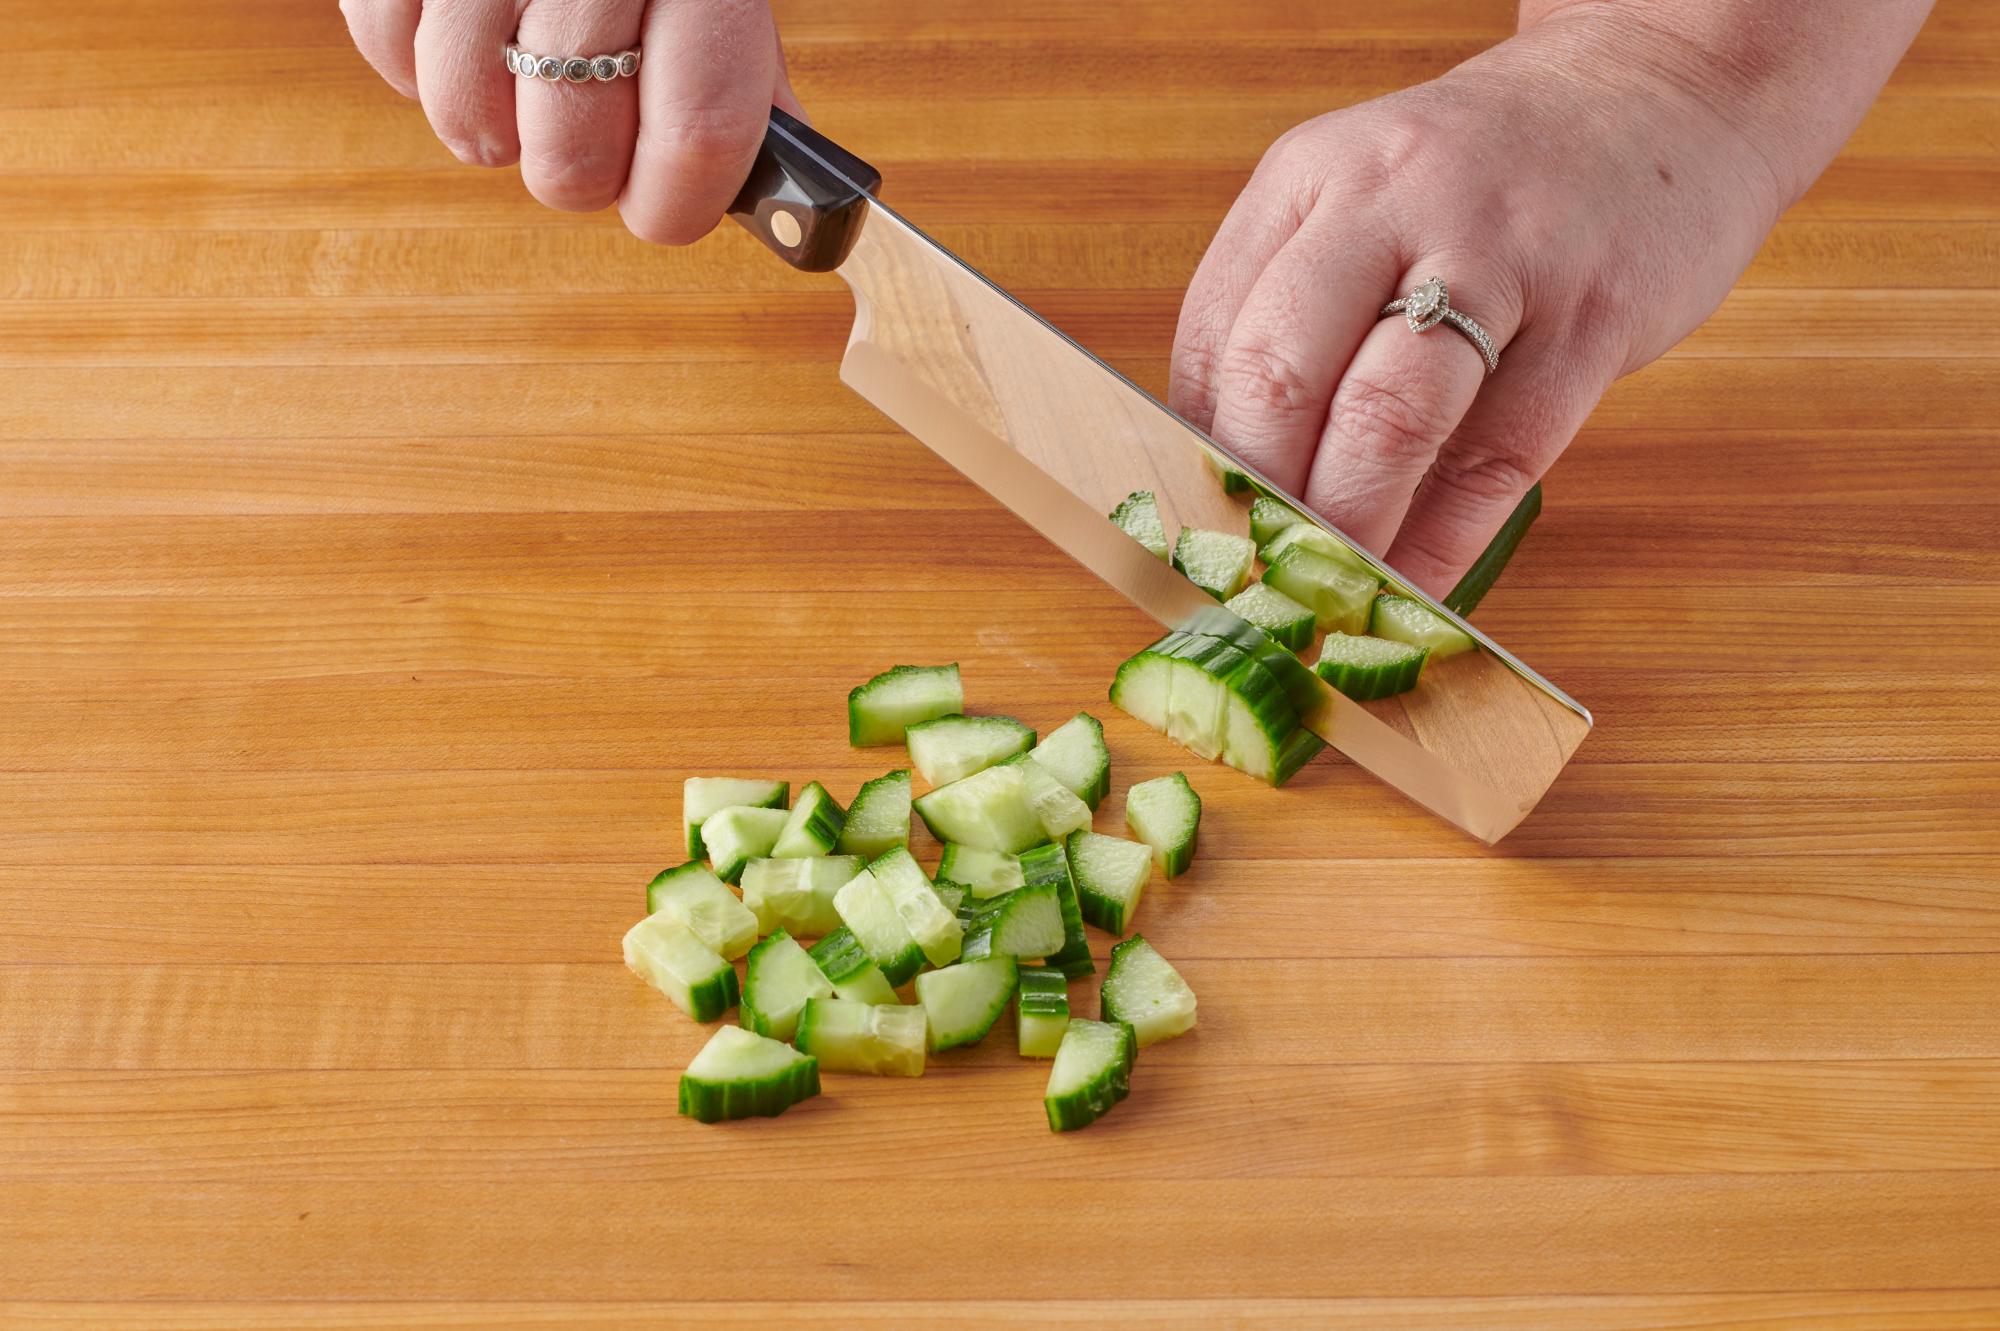 Cutting the cucumber with a 6 Inch Vegetable Knife.